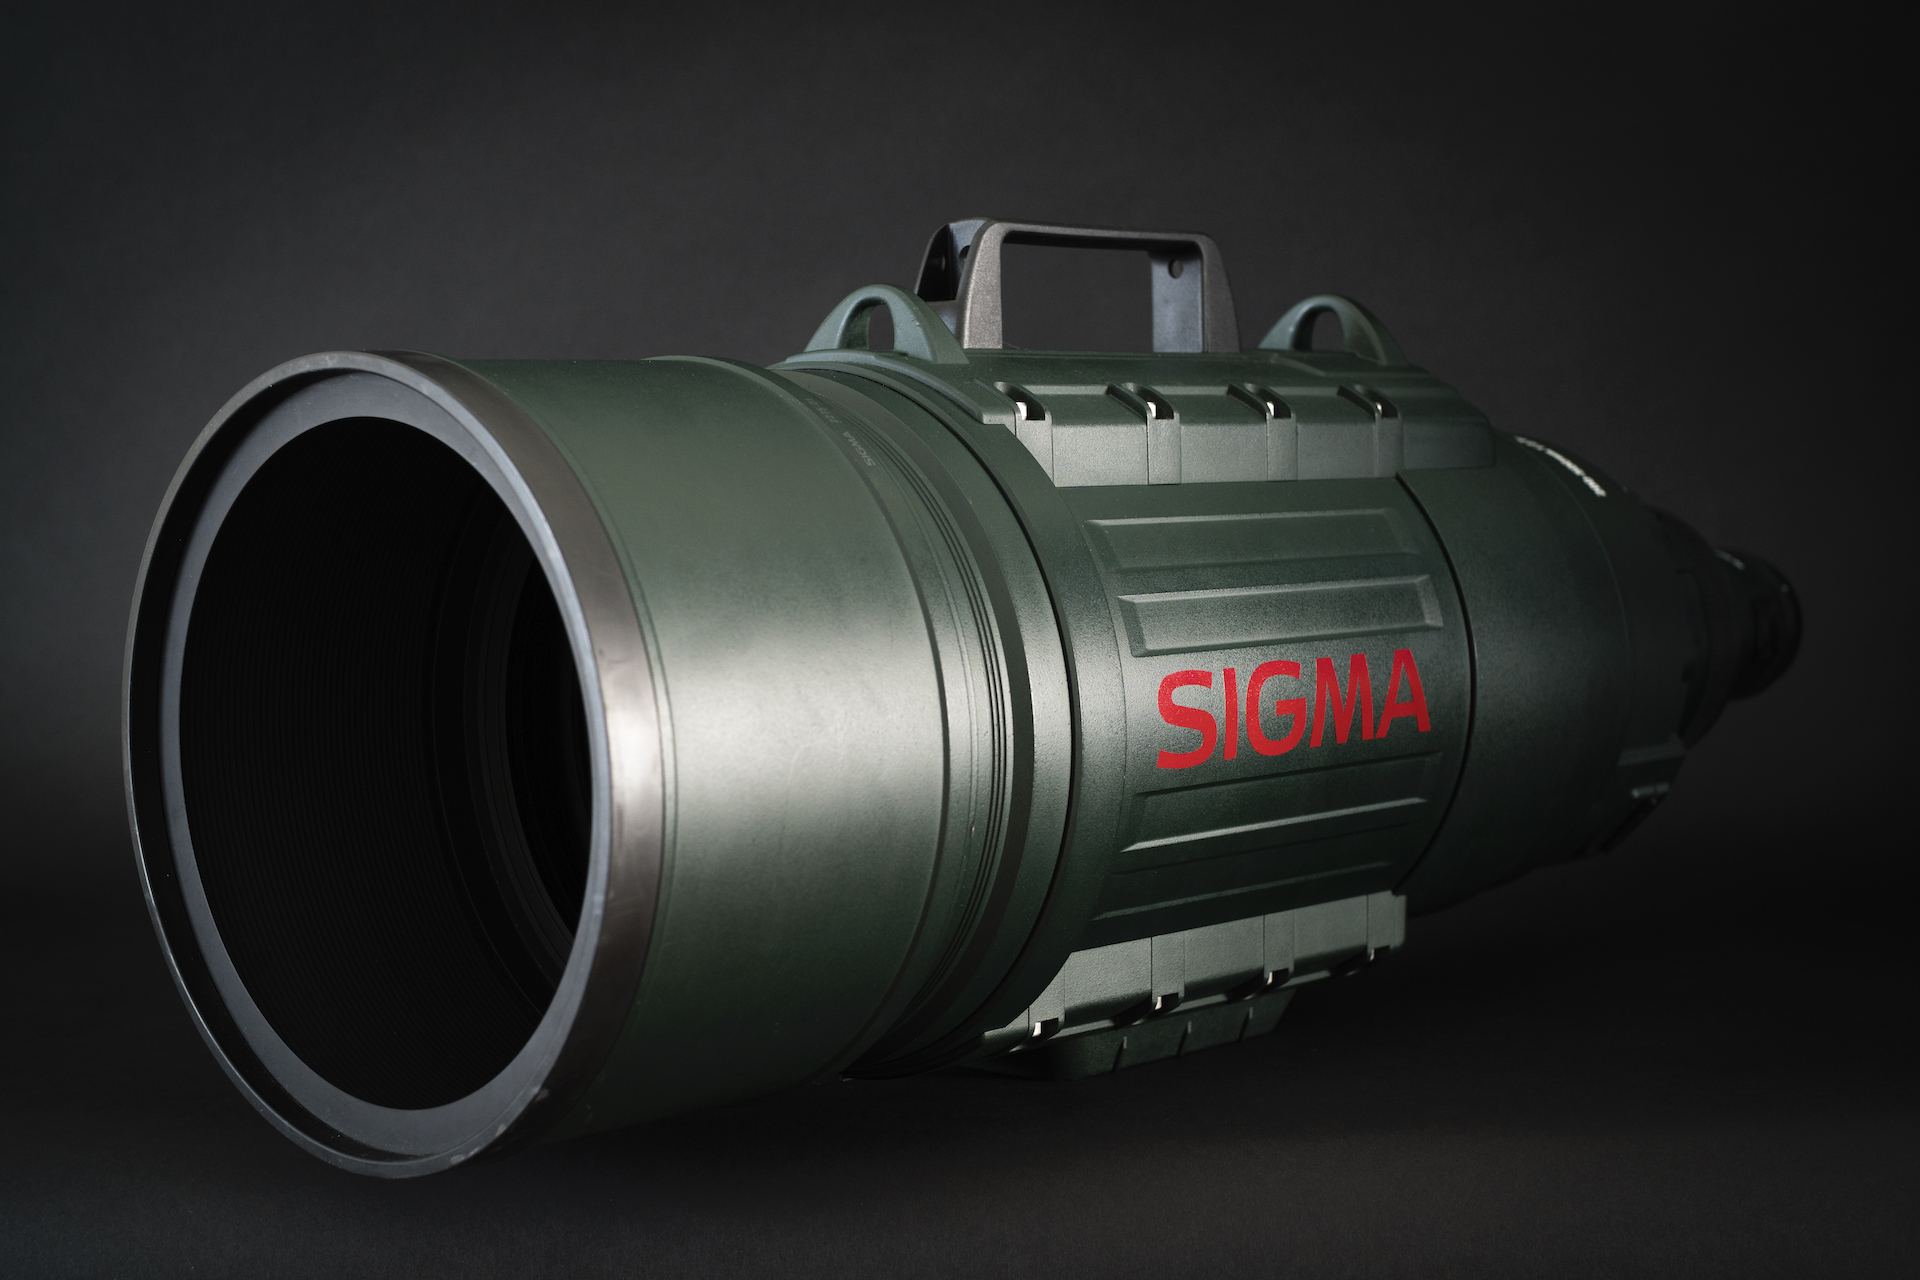 Sigma 200-500mm f/2.8 review